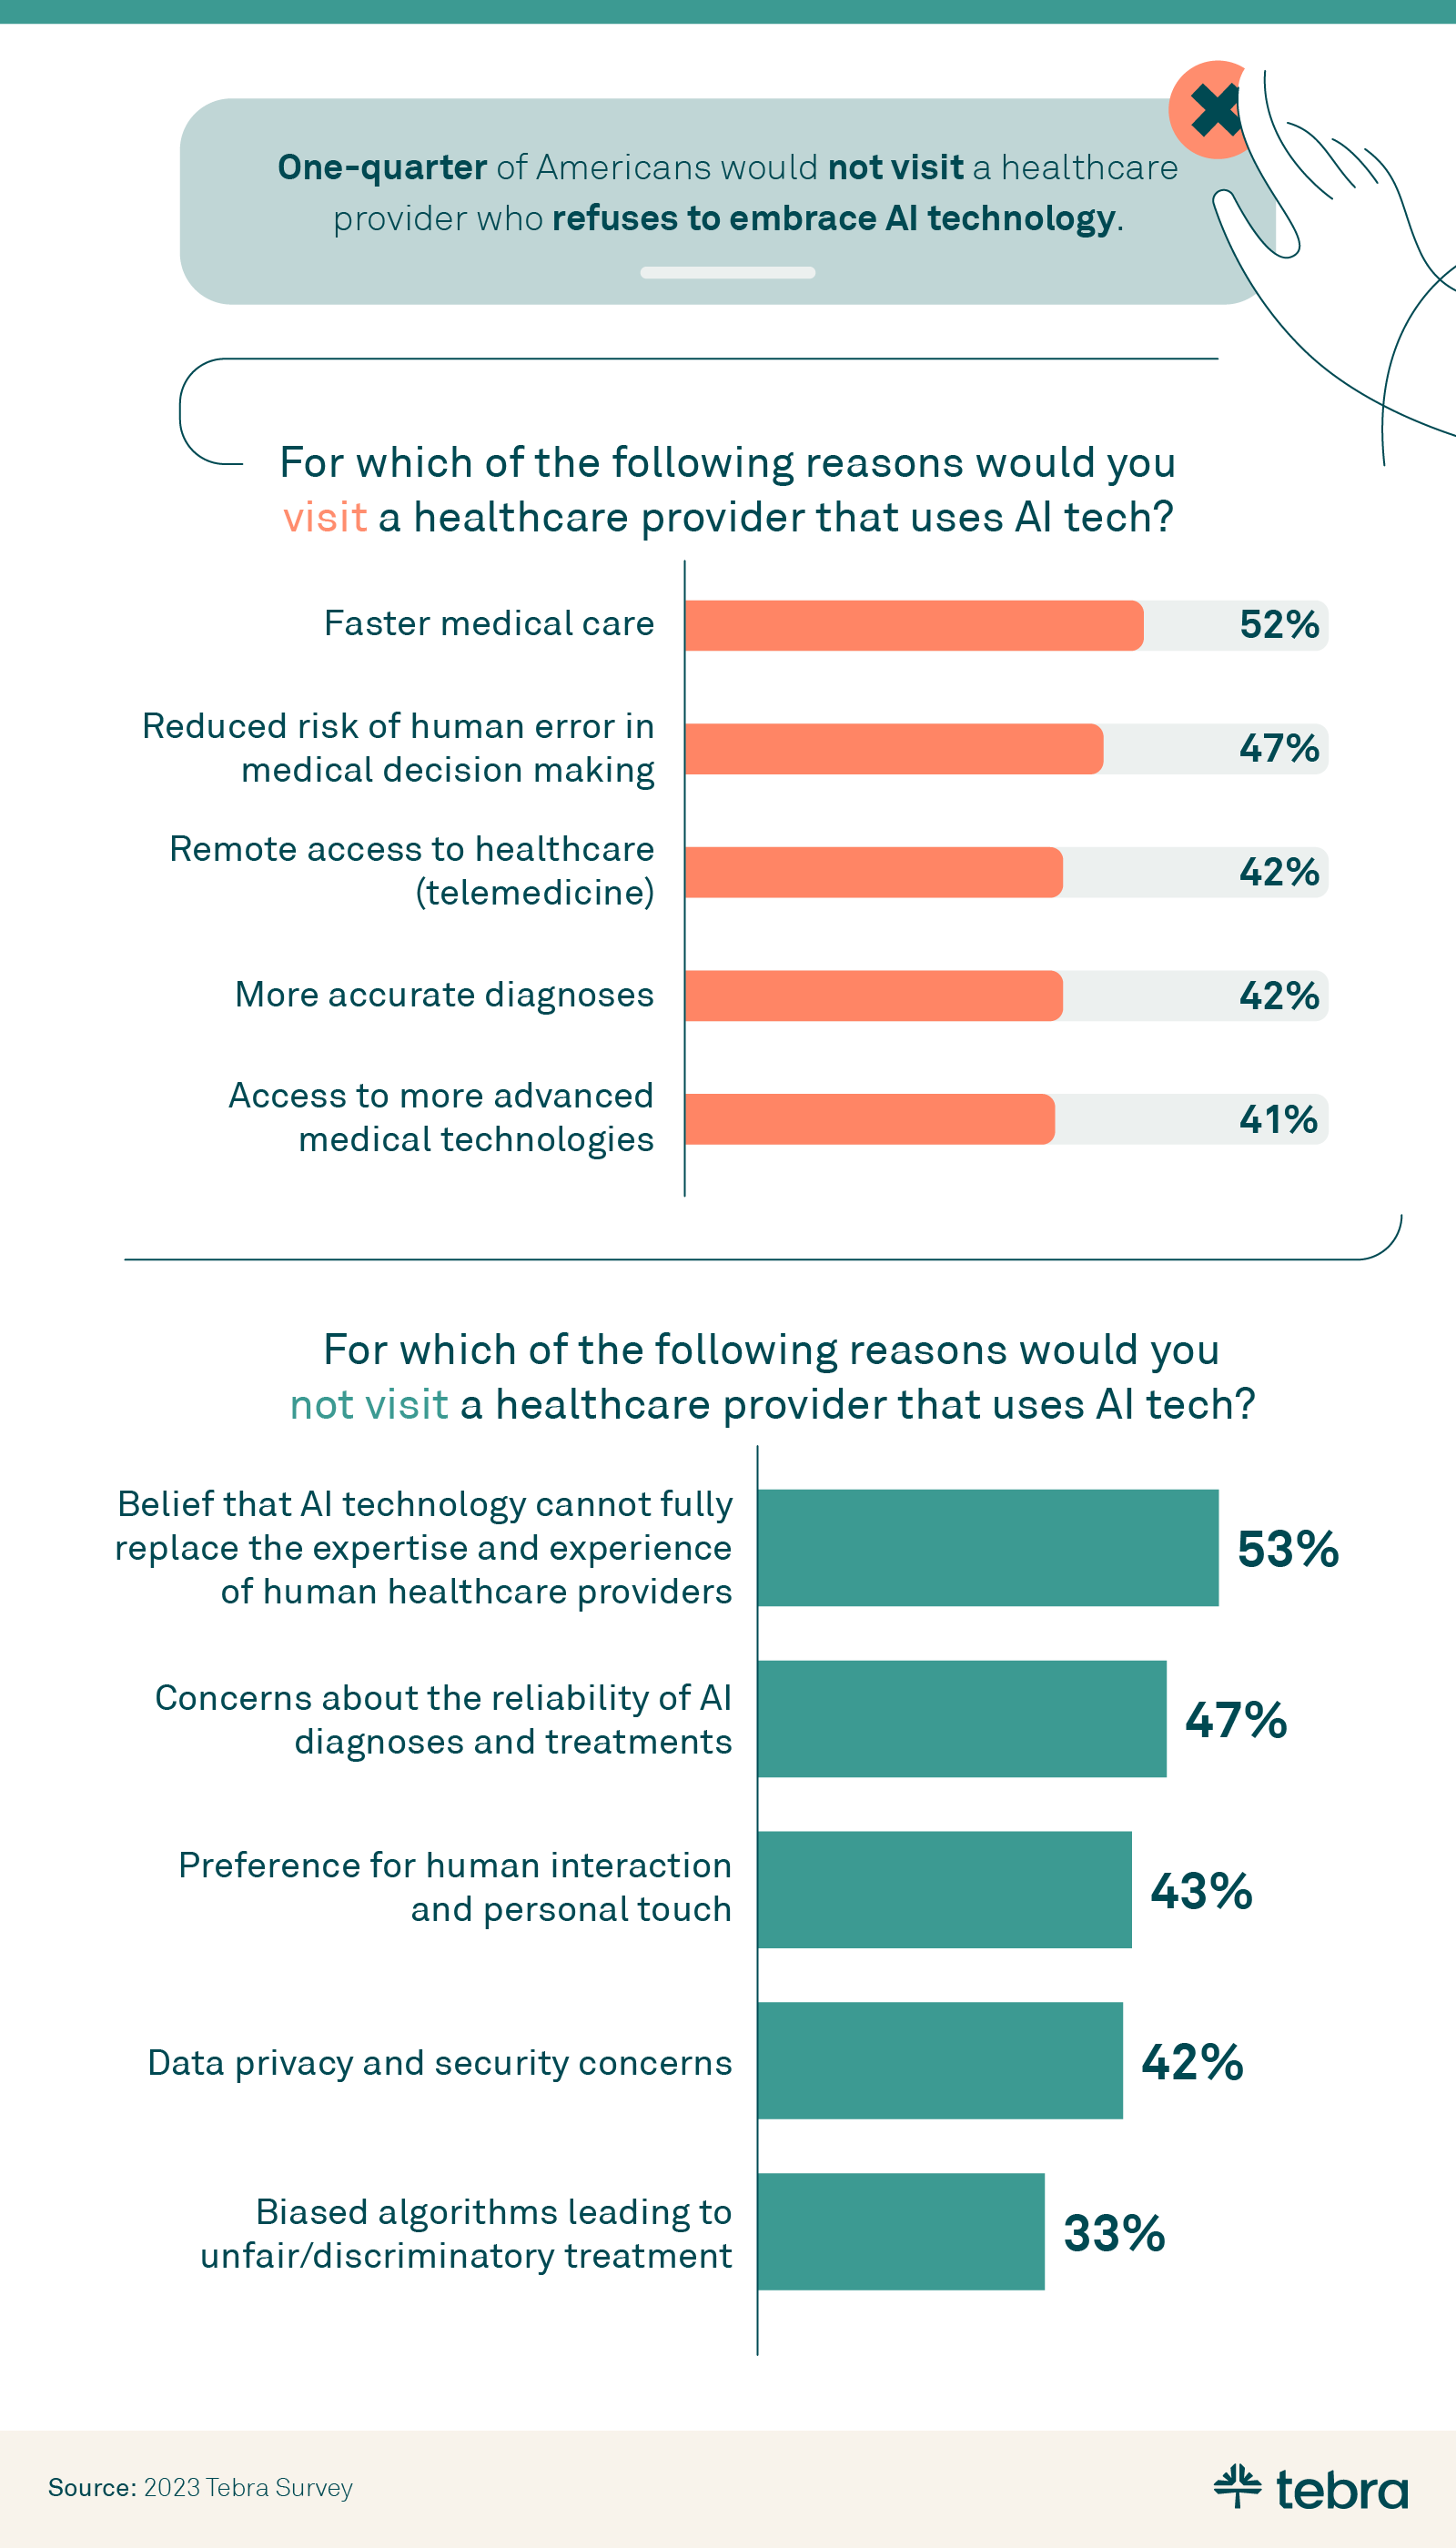 This is an infographic about Tebra research around the topic of AI in healthcare. One-quarter of our respondents said they wouldn’t visit a healthcare provider who refuses to embrace AI technology. The top reasons patients wanted AI in healthcare were faster medical care, less potential for human error, and remote healthcare access. 53% of Americans felt that AI can’t replace the experience of a human health expert, and 43% preferred human interaction and touch. Furthermore, 47% worried that AI may not yet be able to diagnose and treat health conditions accurately. 